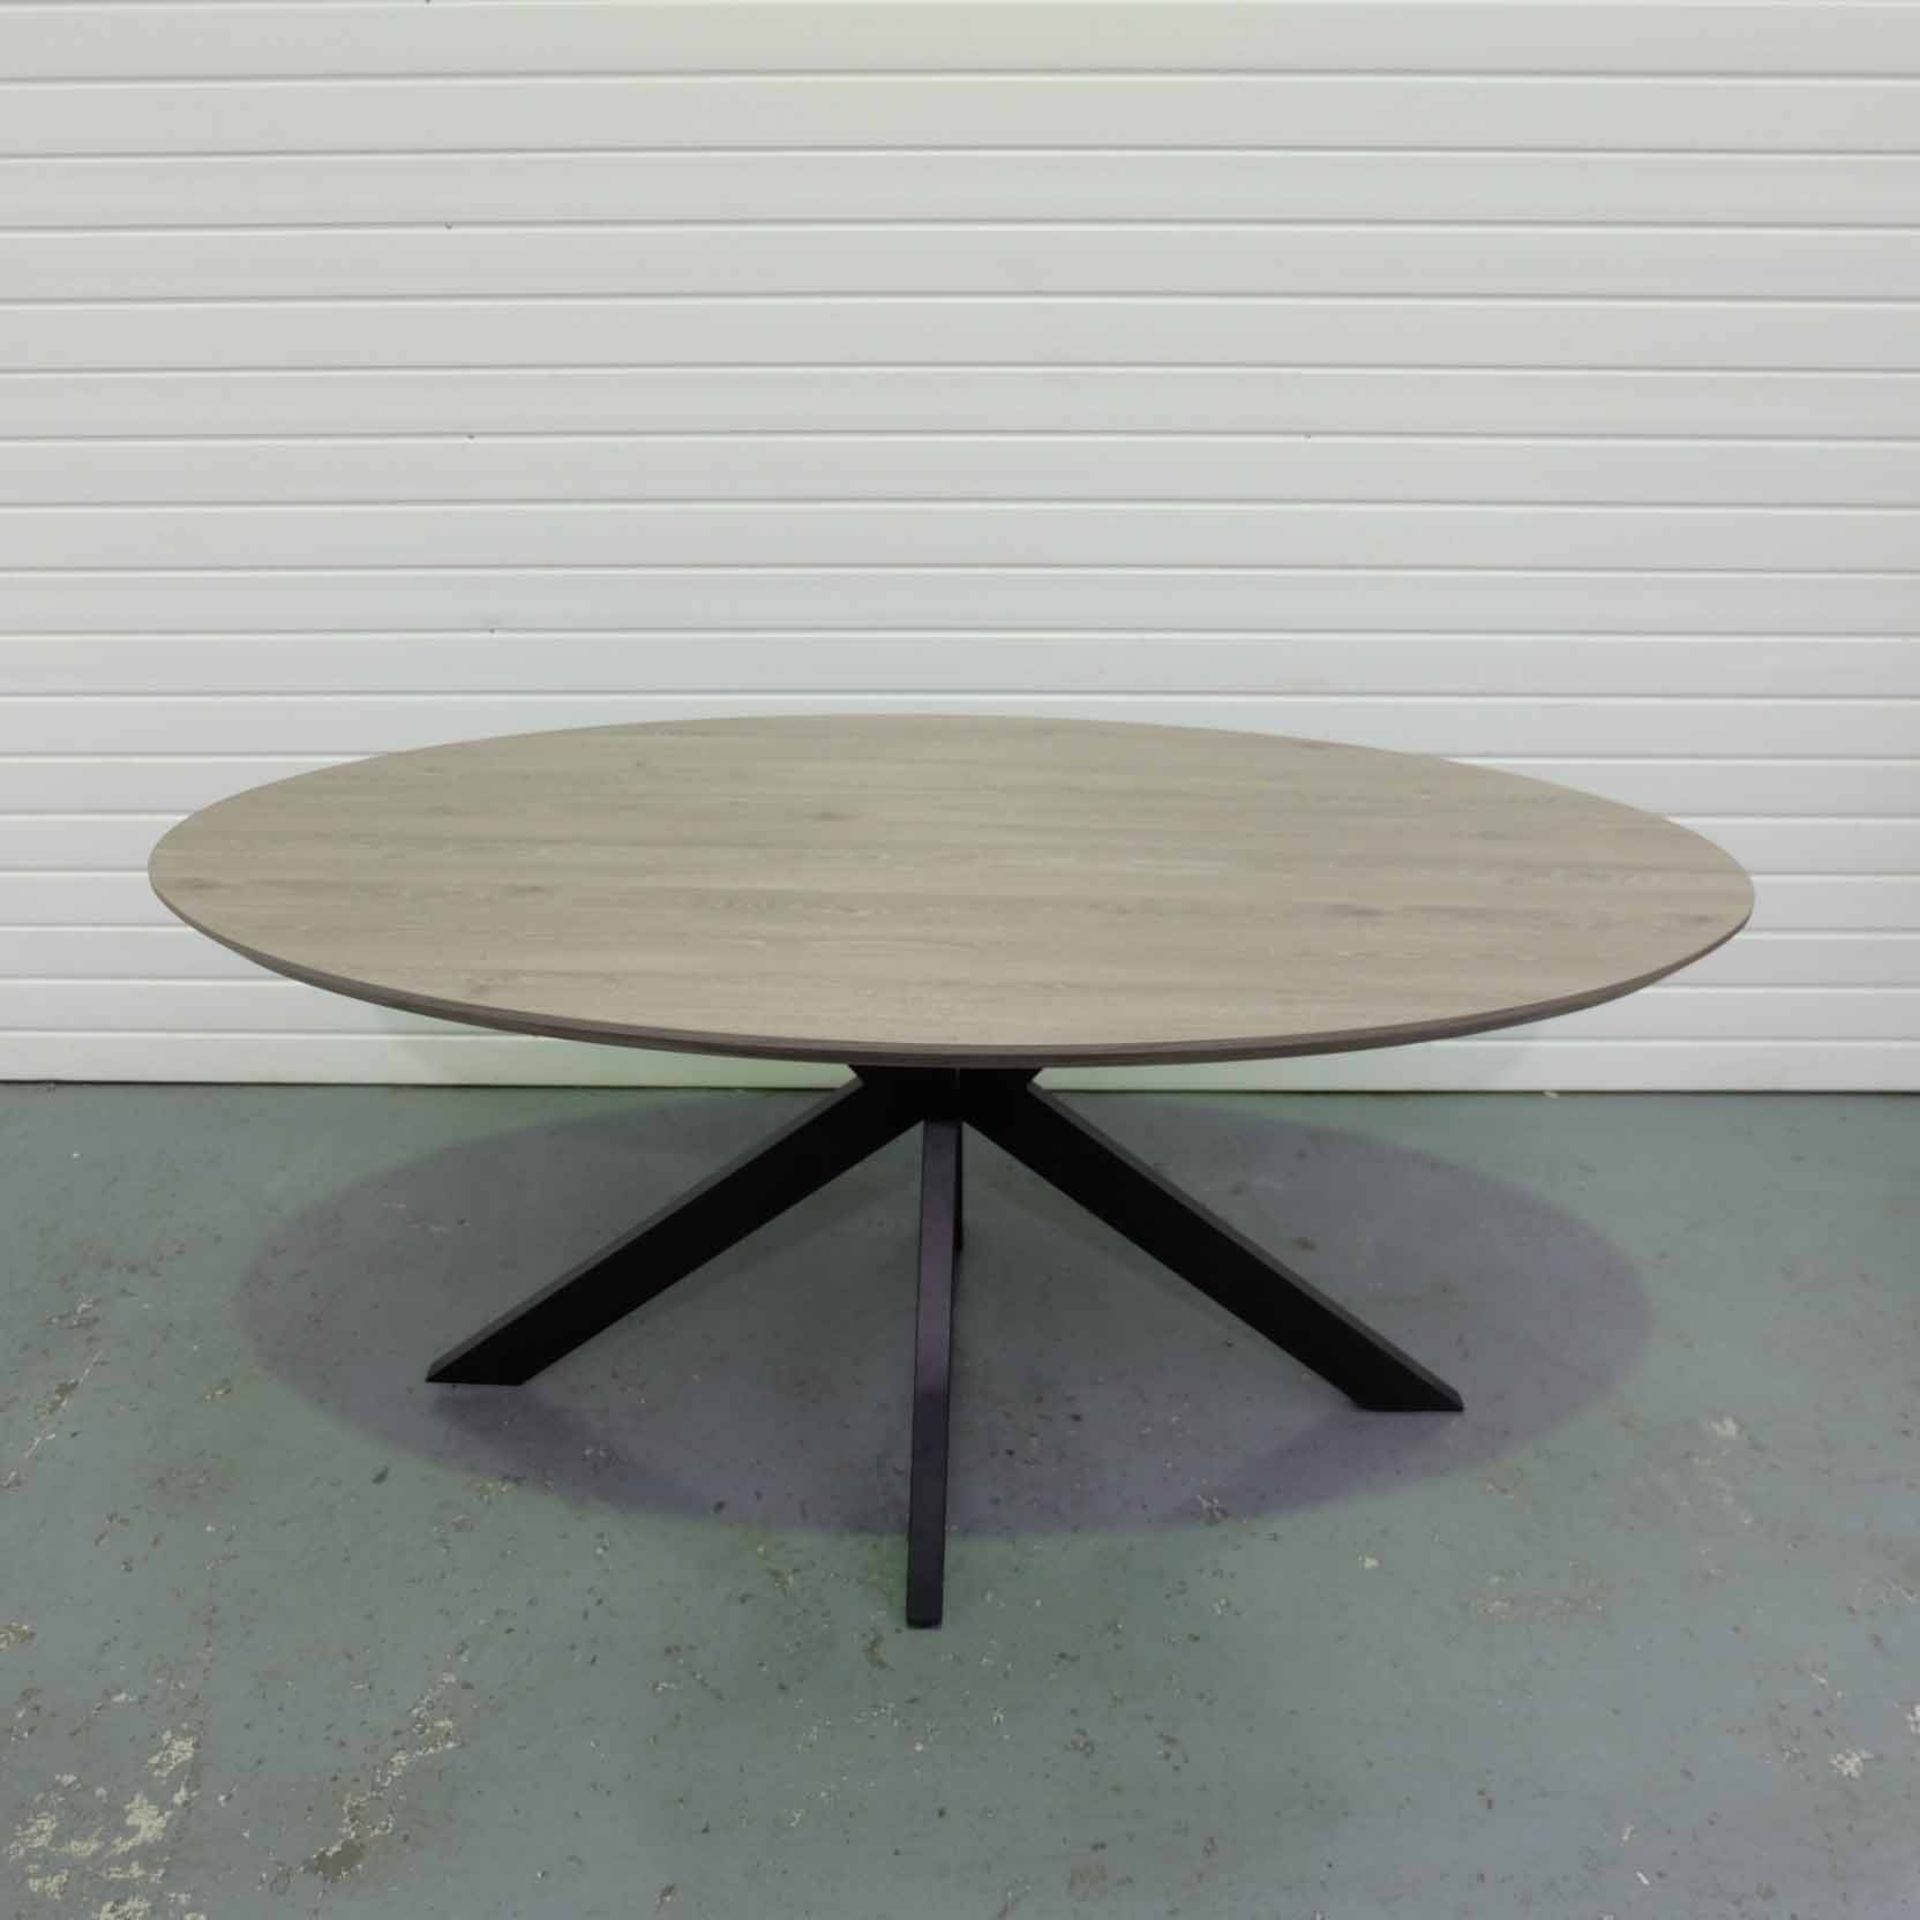 Furniture Link 'Manhattan' Oval Dining Table. SmarTops® Technology (Heat, Stain and Scratch resistan